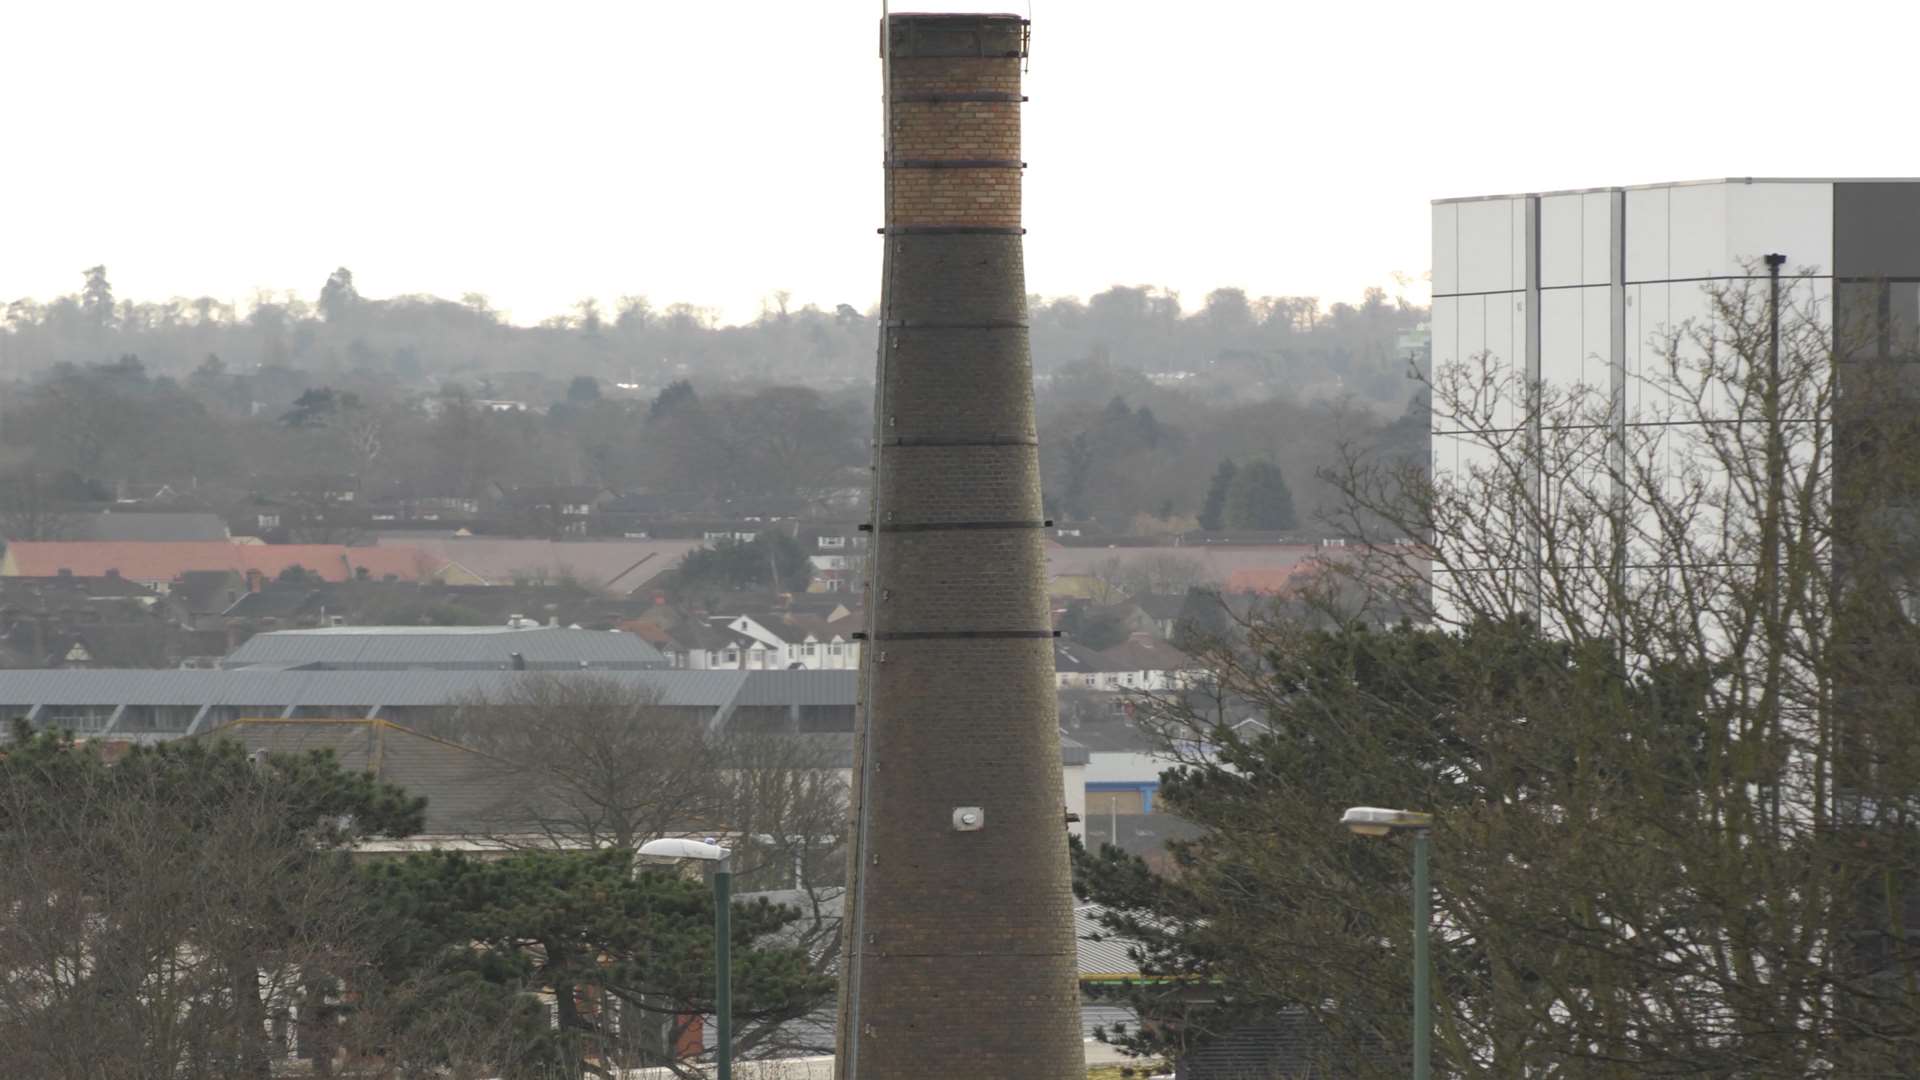 The paper mill's chimney is expected to stay if plans are approved.